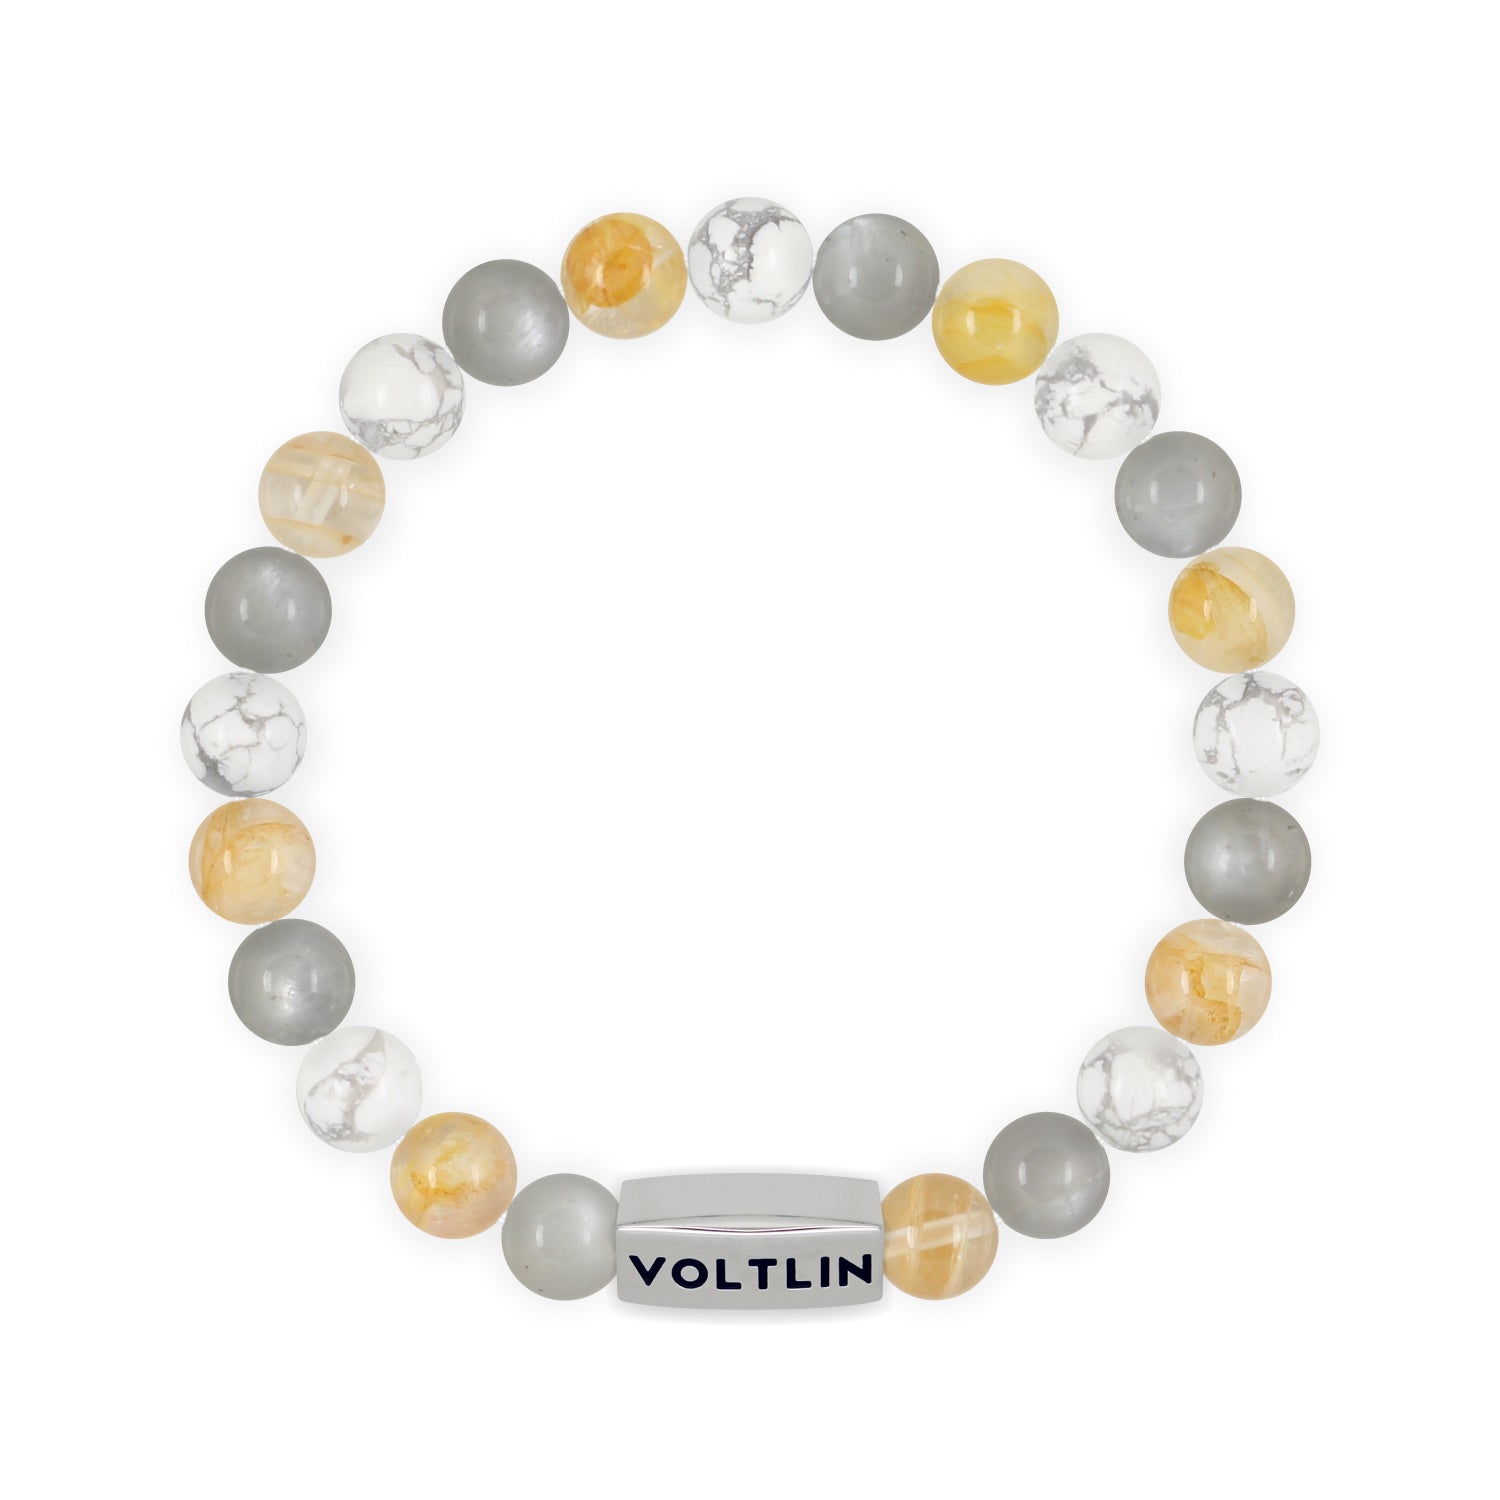 Front view of an 8mm Gemini Zodiac beaded stretch bracelet featuring Moonstone, Citrine, & Howlite crystal and silver stainless steel logo bead made by Voltlin